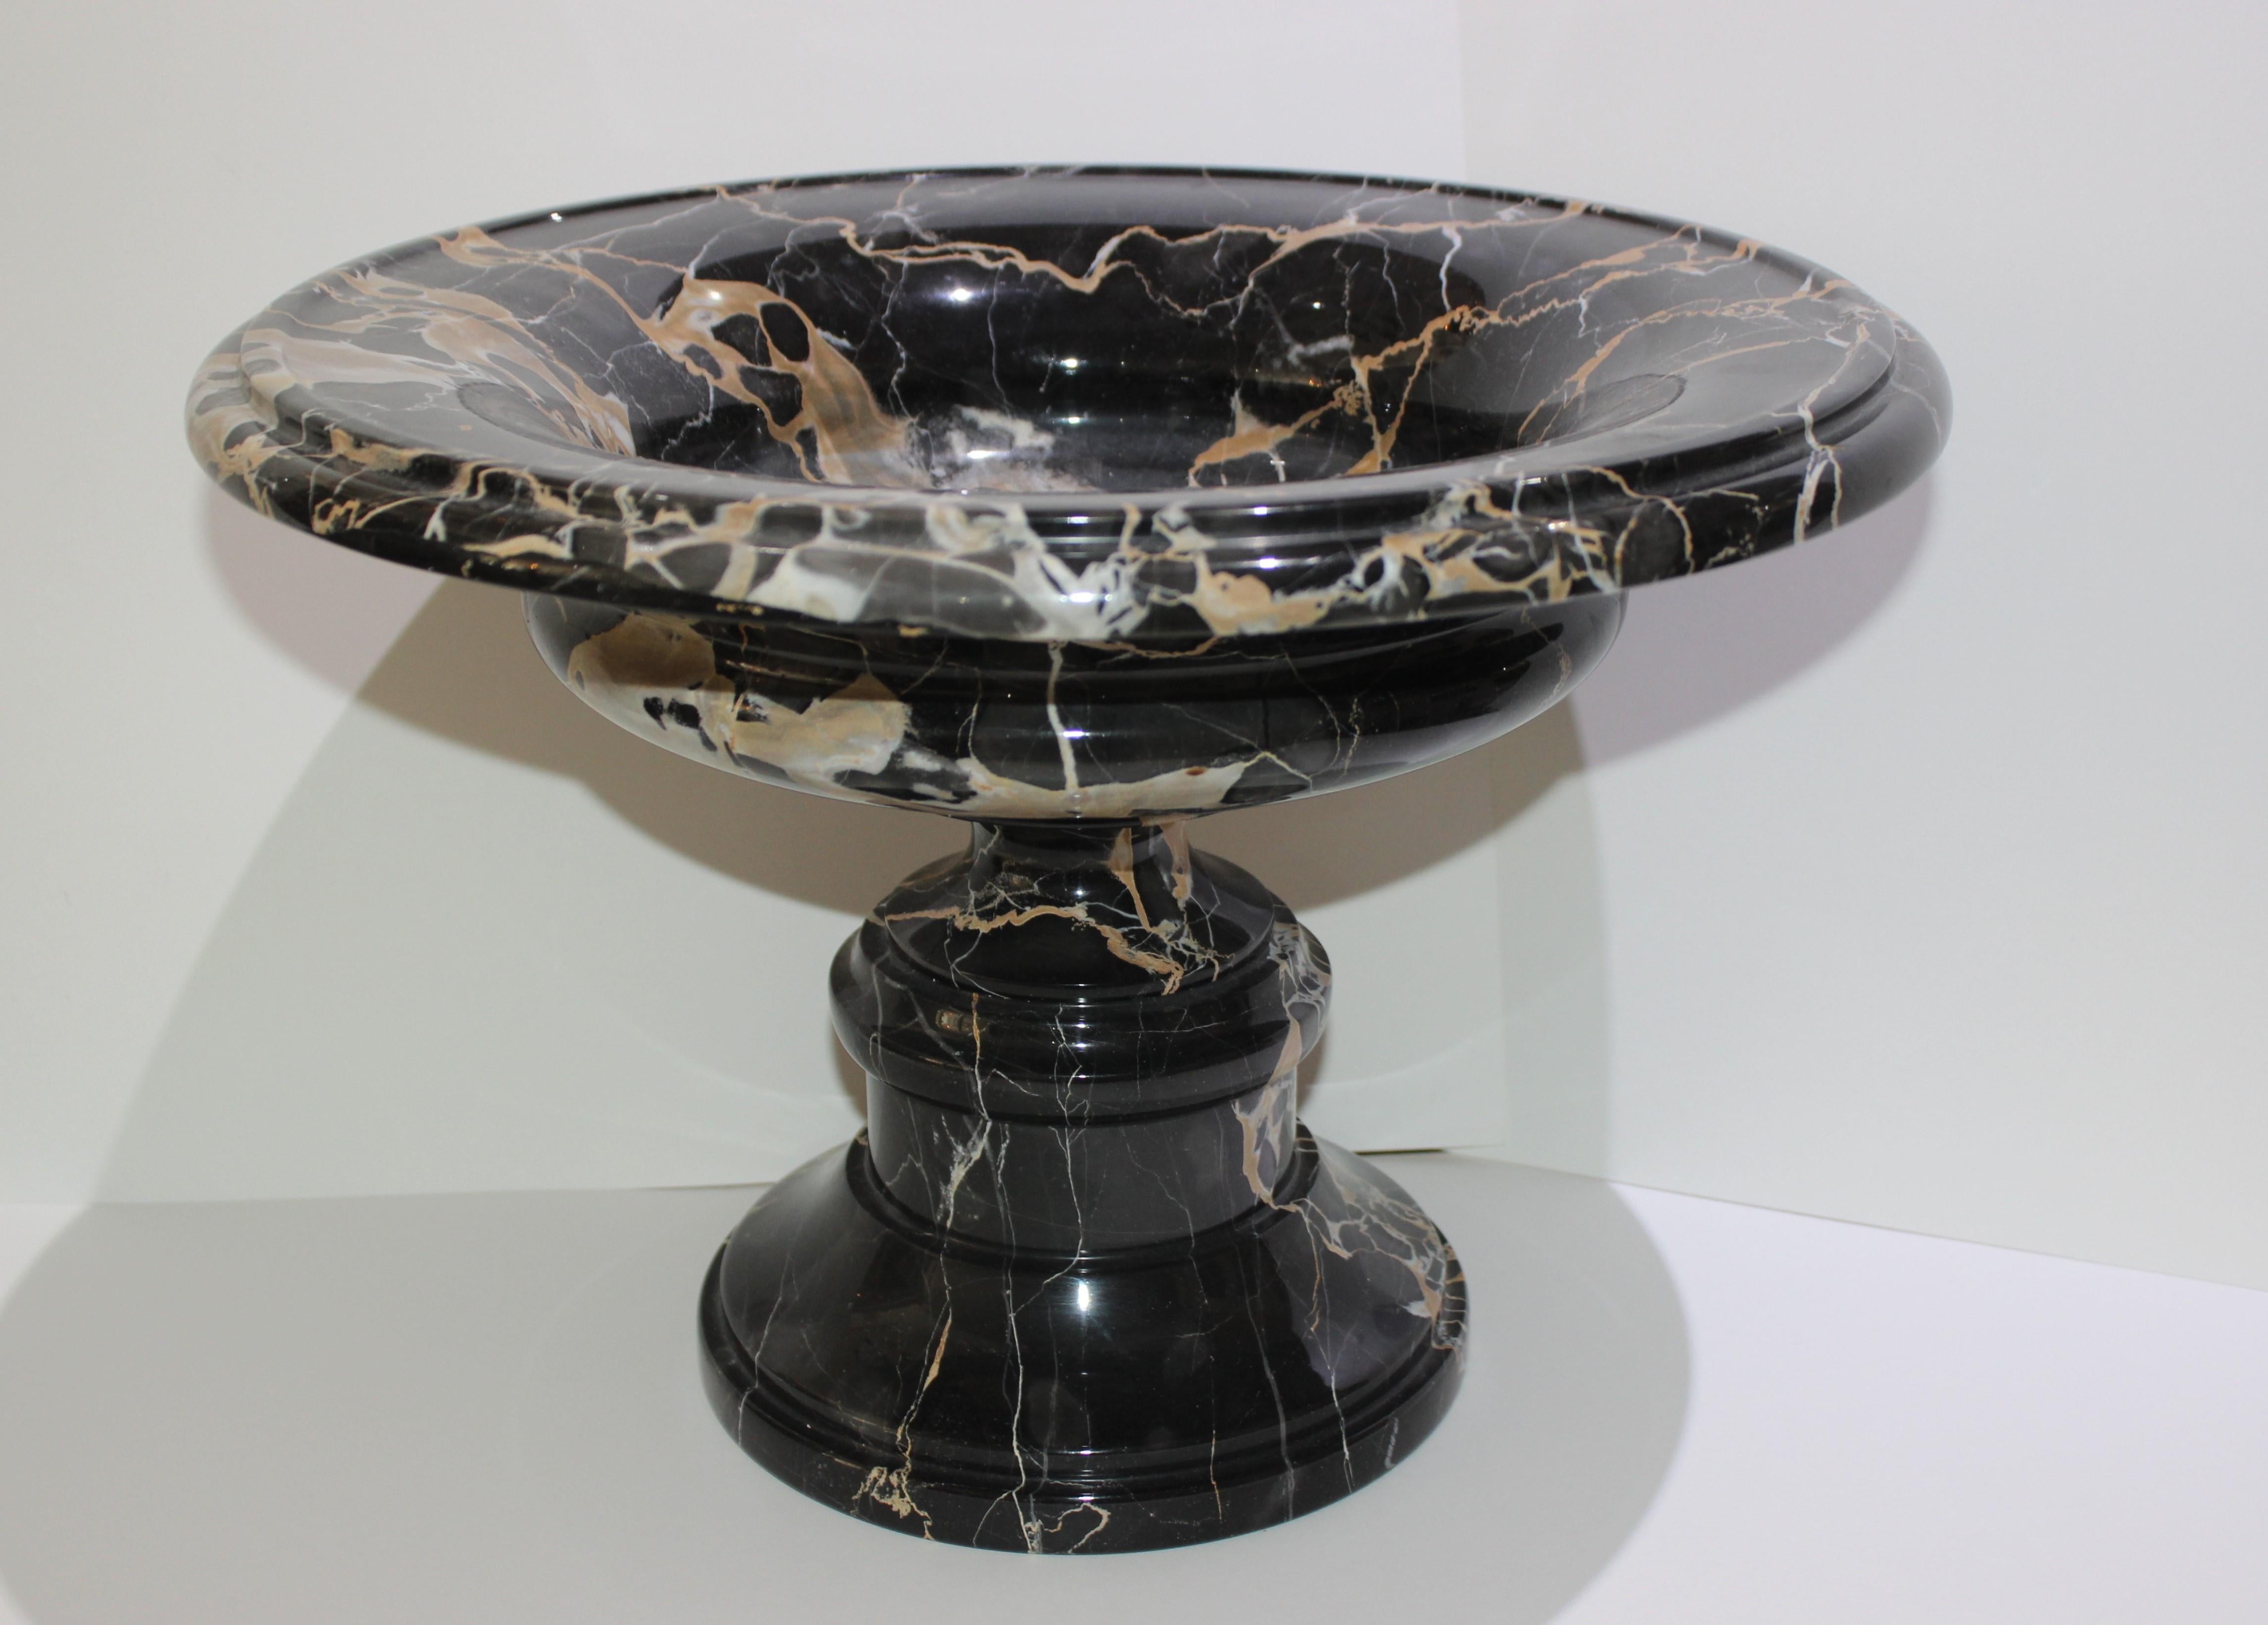 Grand Tour Variegated Black Portoro Marble Tazza urn from a Palm Beach estate


Note: the last picture 2 pictures show the Tazza Urn bowl in a staged setting -- Only the tazza urn is for sale in this listing.